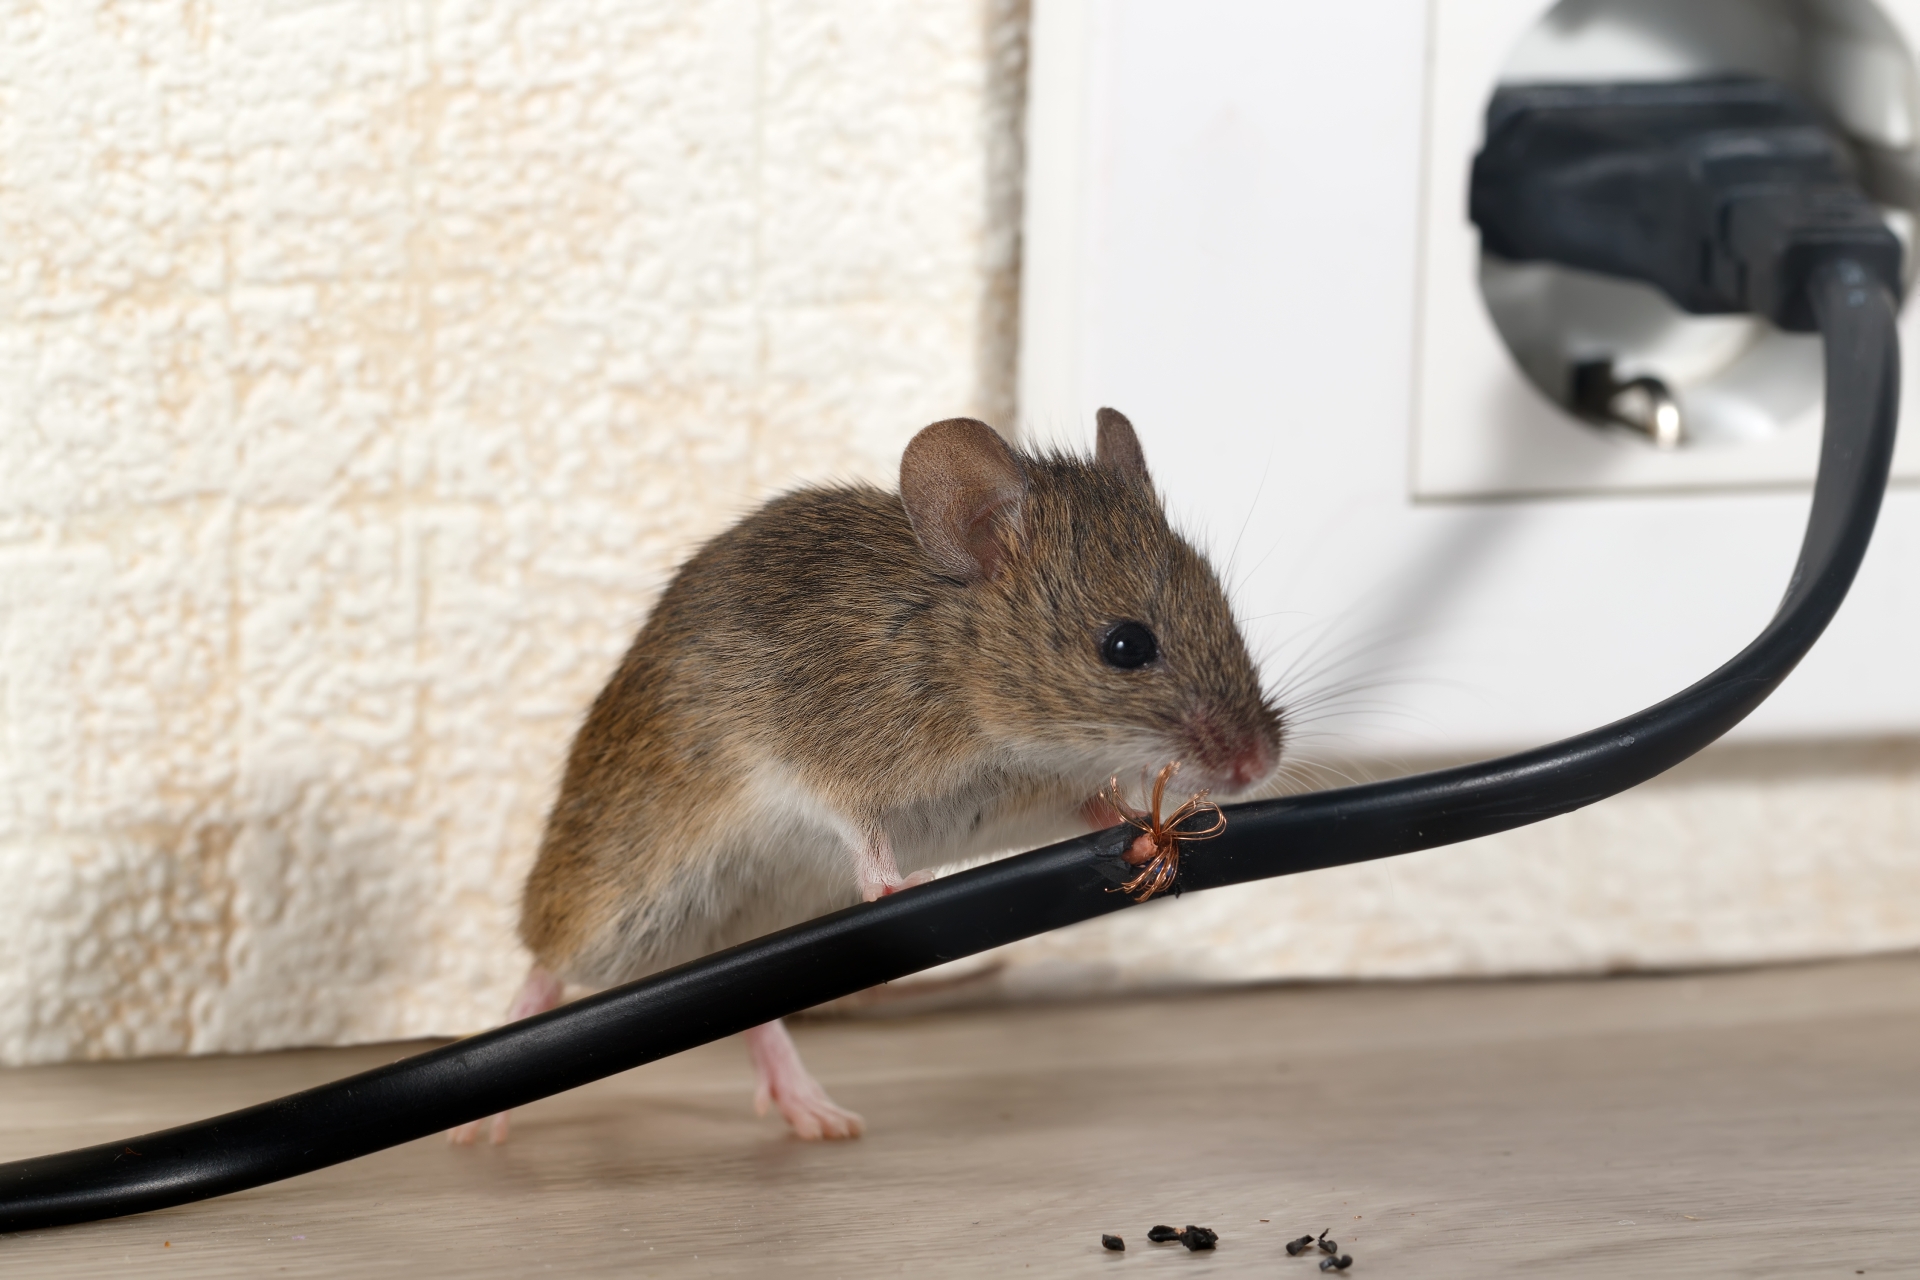 Mice Infestation, Pest Control in Garston, Leavesden, WD25. Call Now 020 8166 9746